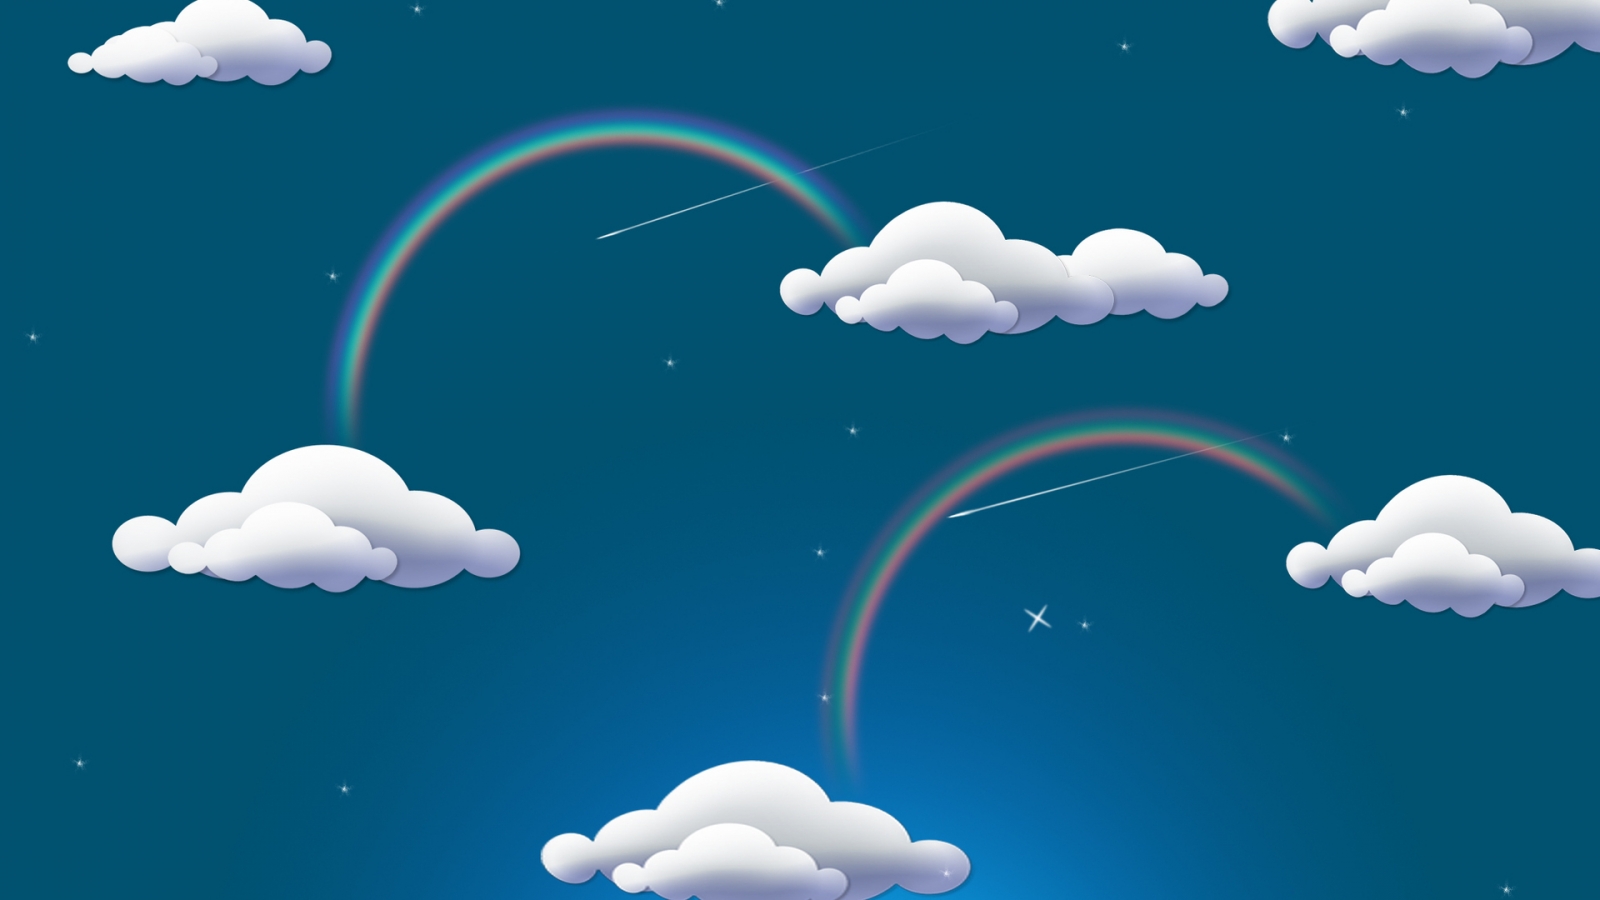 Rainbow and Clouds for 1600 x 900 HDTV resolution